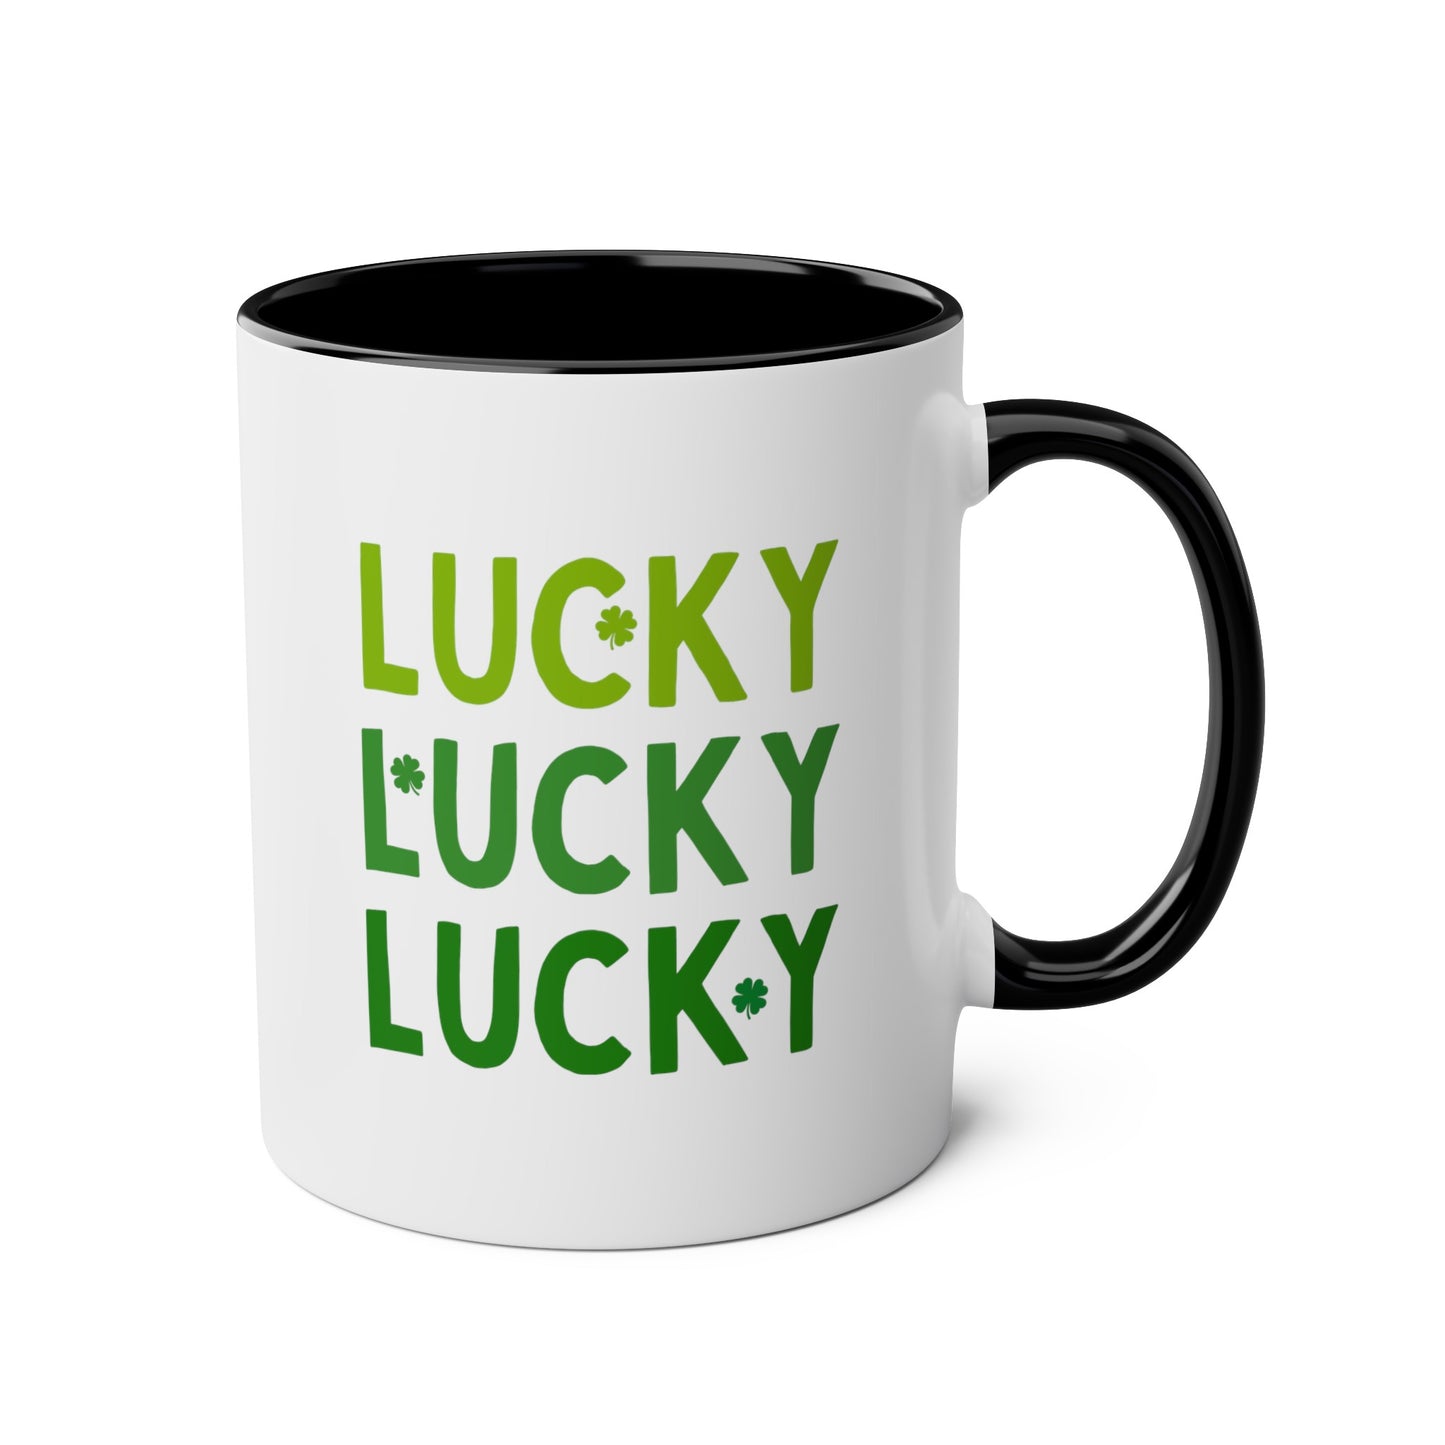 Lucky Lucky Lucky 11oz white with black accent funny coffee mug tea cup gift for st pattys day saint patricks luck Irish holiday shamrock green shenanigans waveywares wavey wares wavywares wavy wares